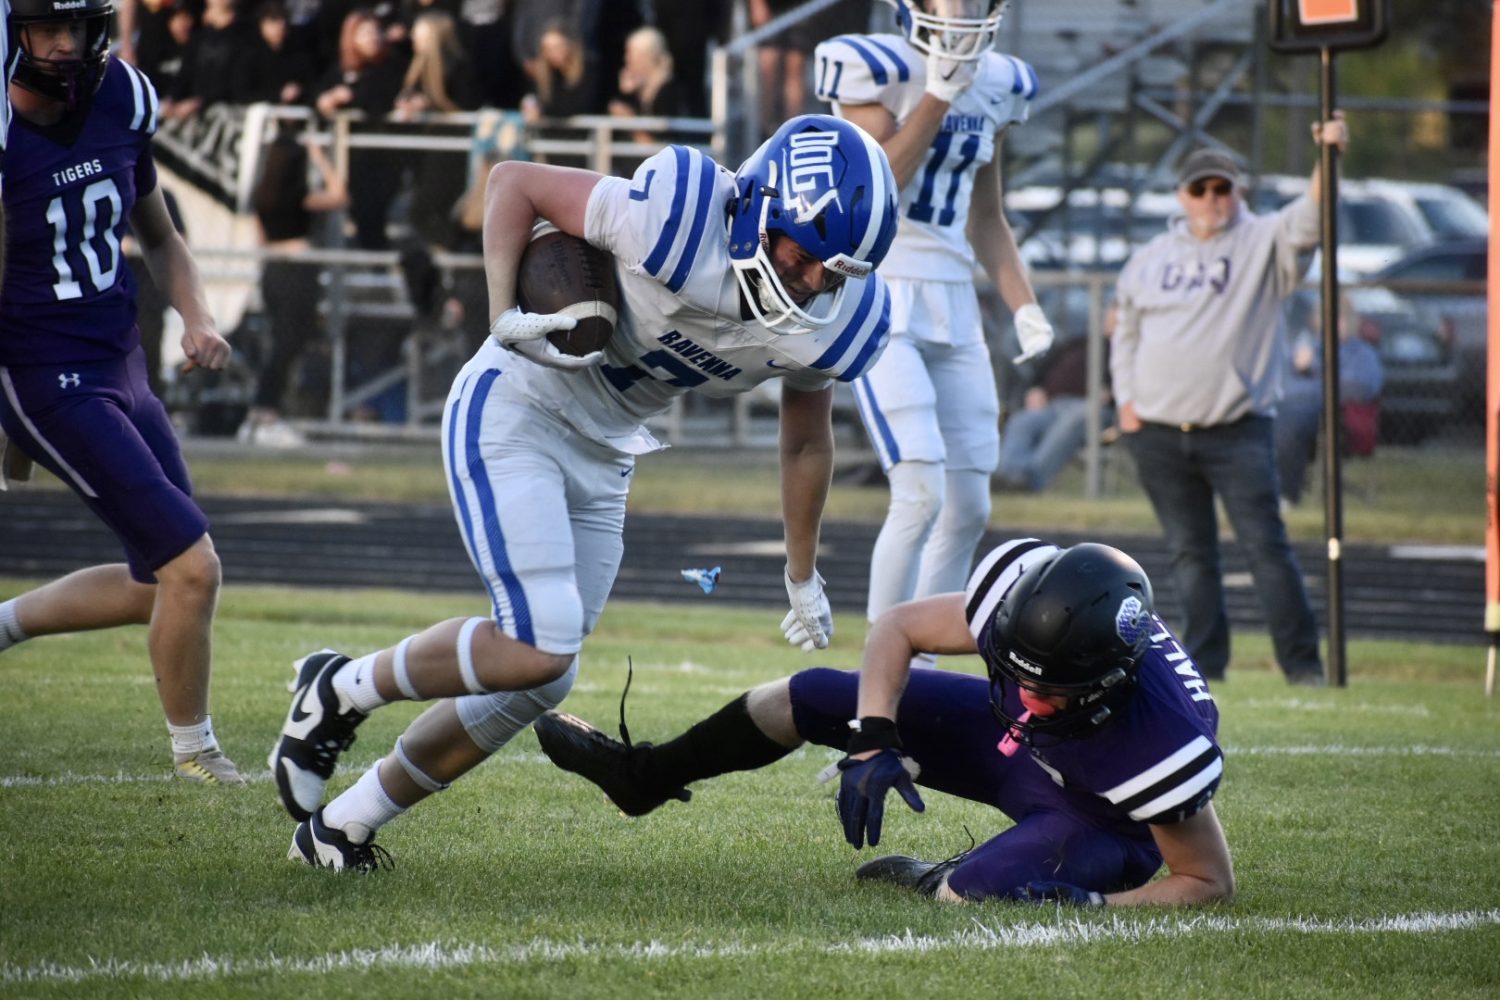 Ravenna battles injuries in shutout win over Shelby